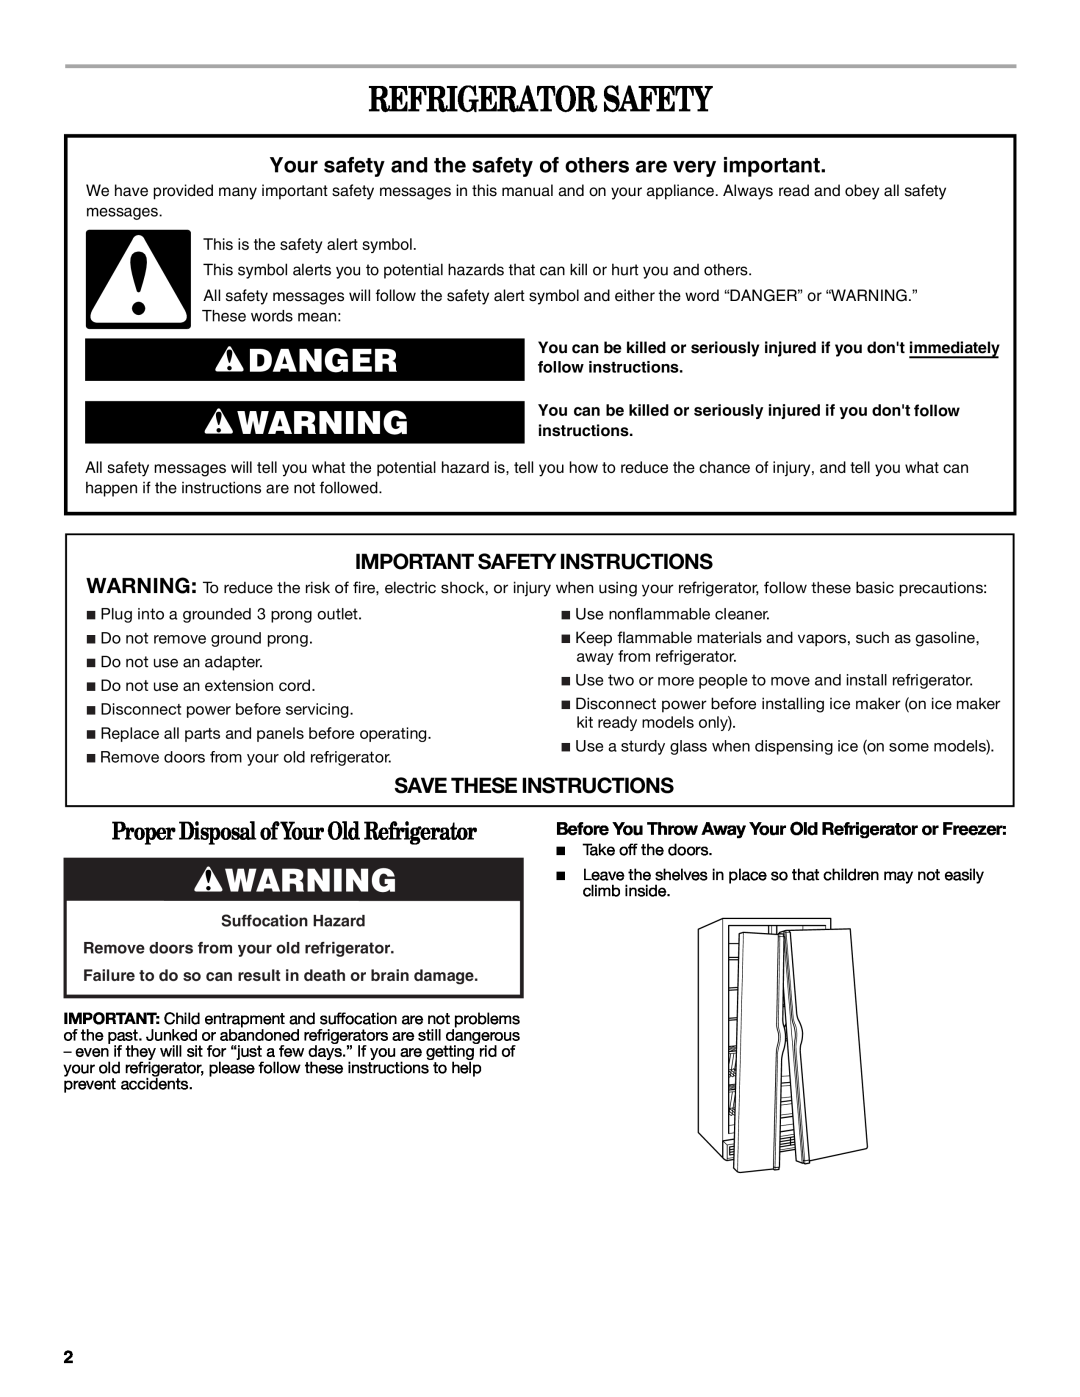 Whirlpool ED2JHGXRB00 warranty Refrigerator Safety, Danger, Important Safety Instructions, Save These Instructions 